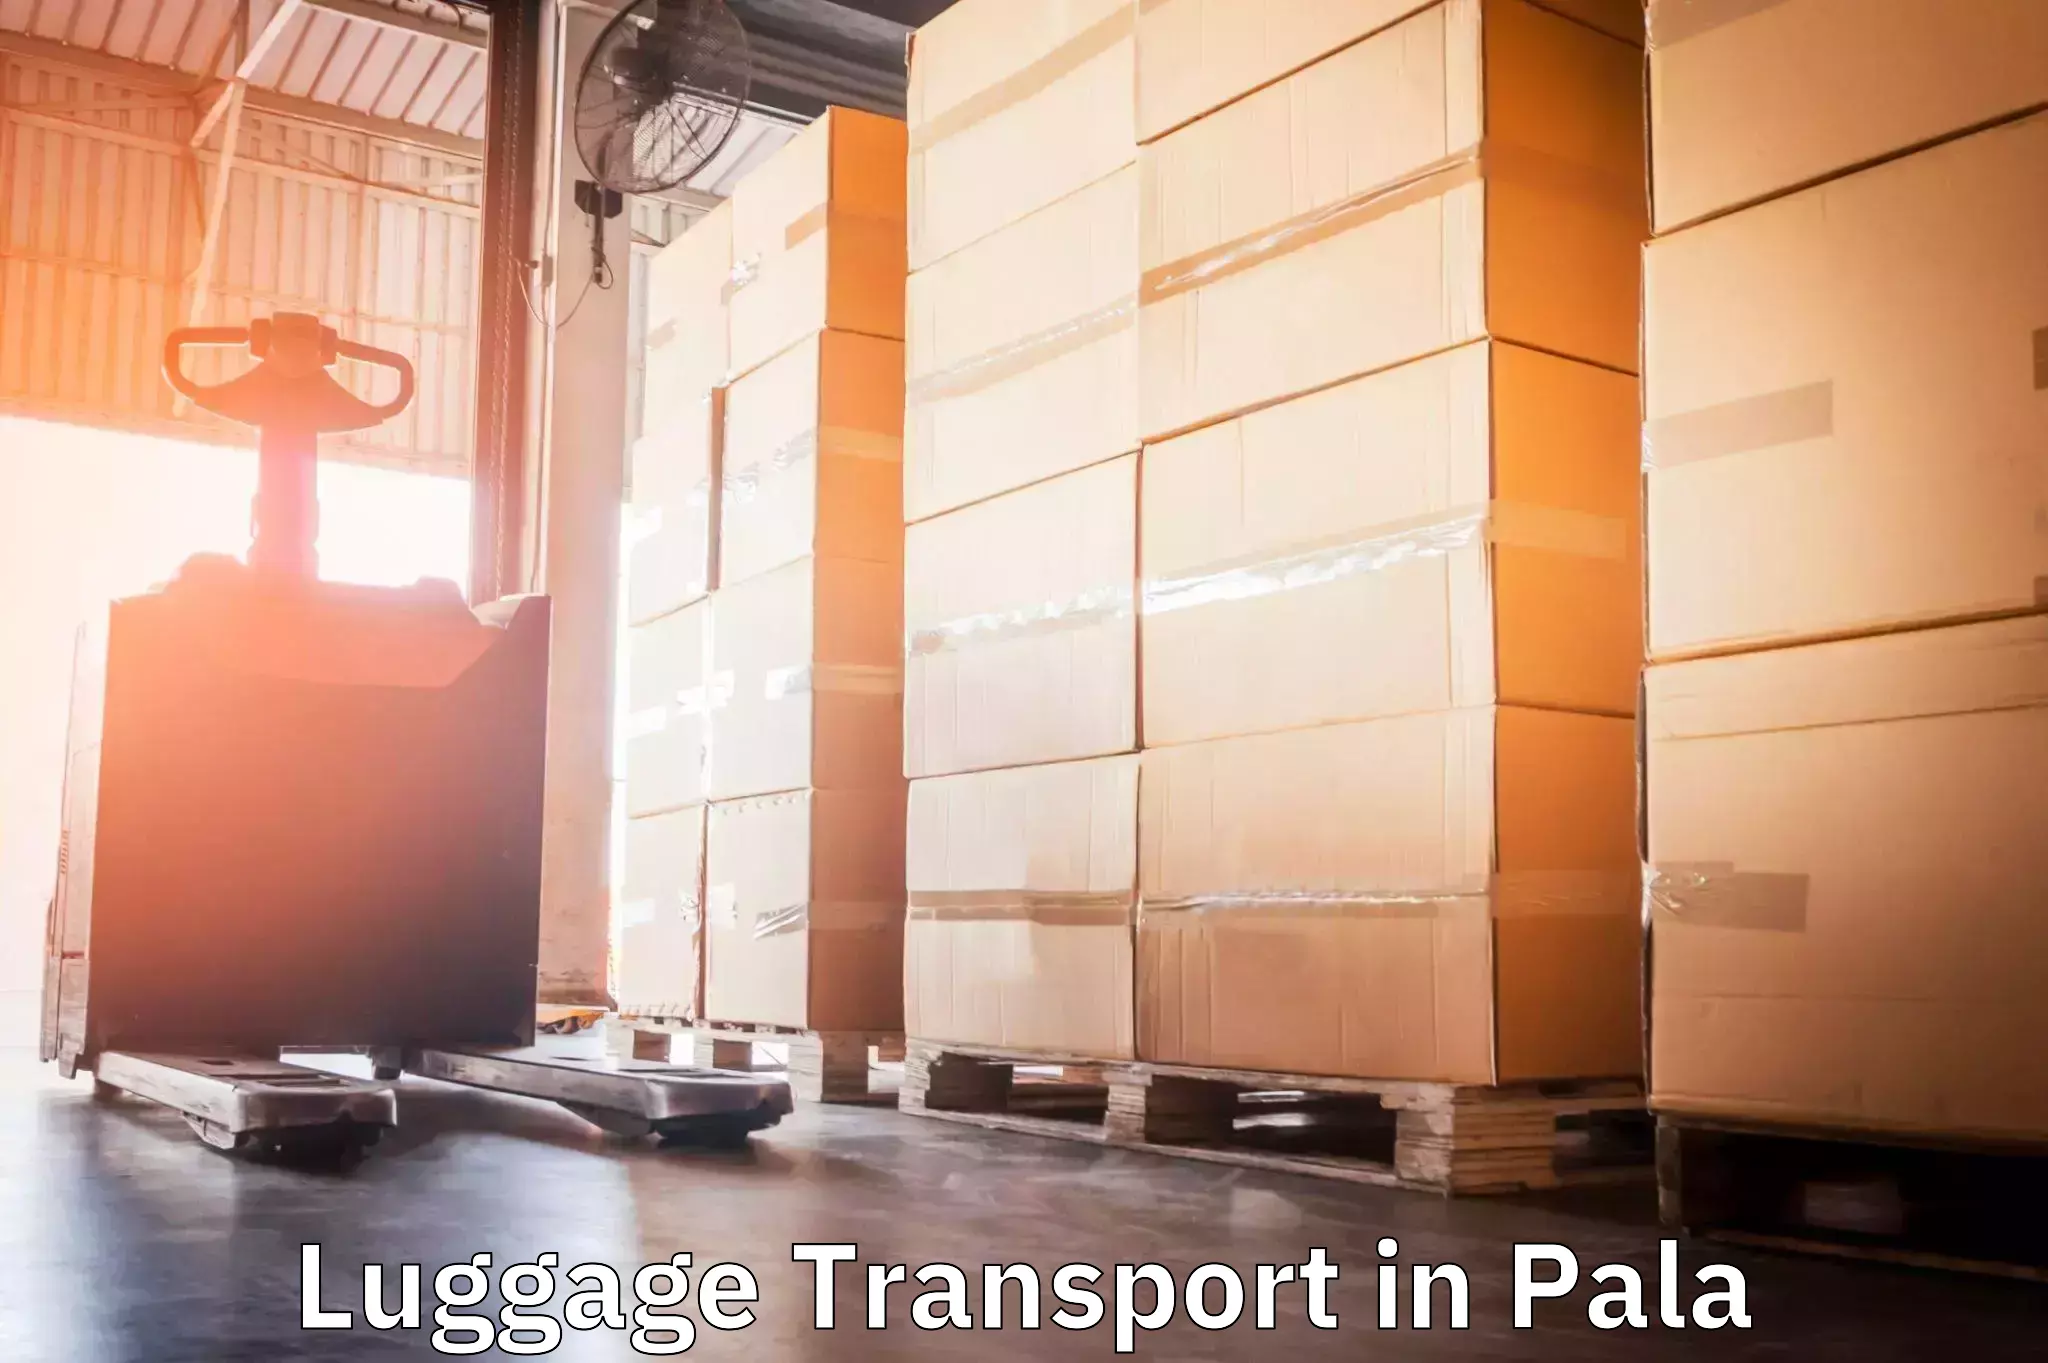 Luggage shipping consultation in Pala